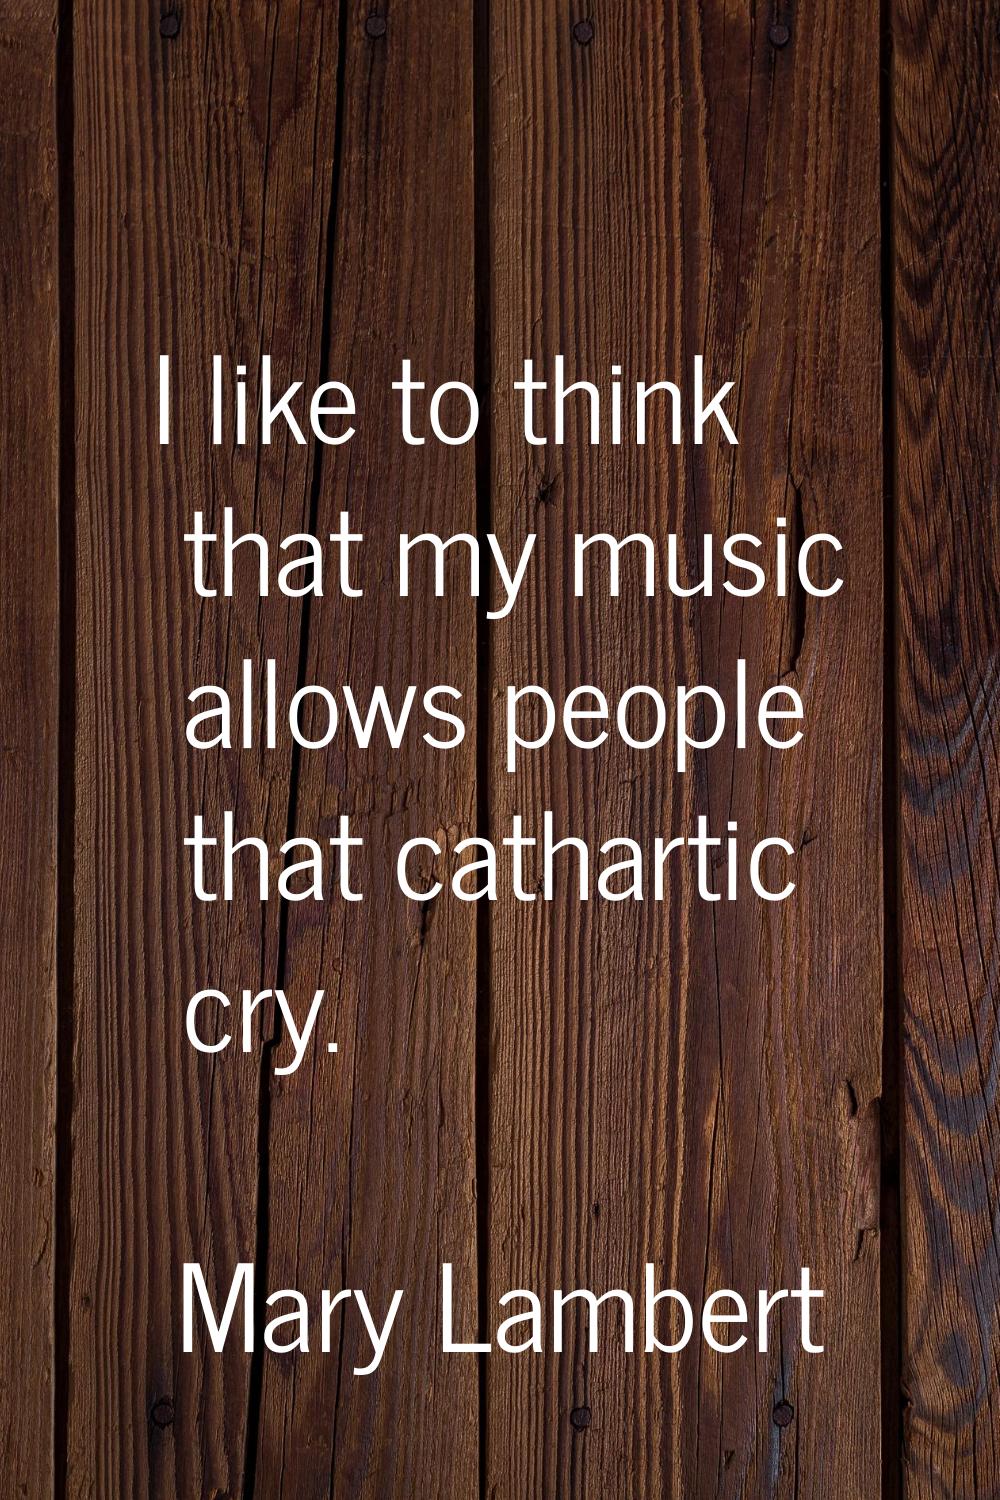 I like to think that my music allows people that cathartic cry.